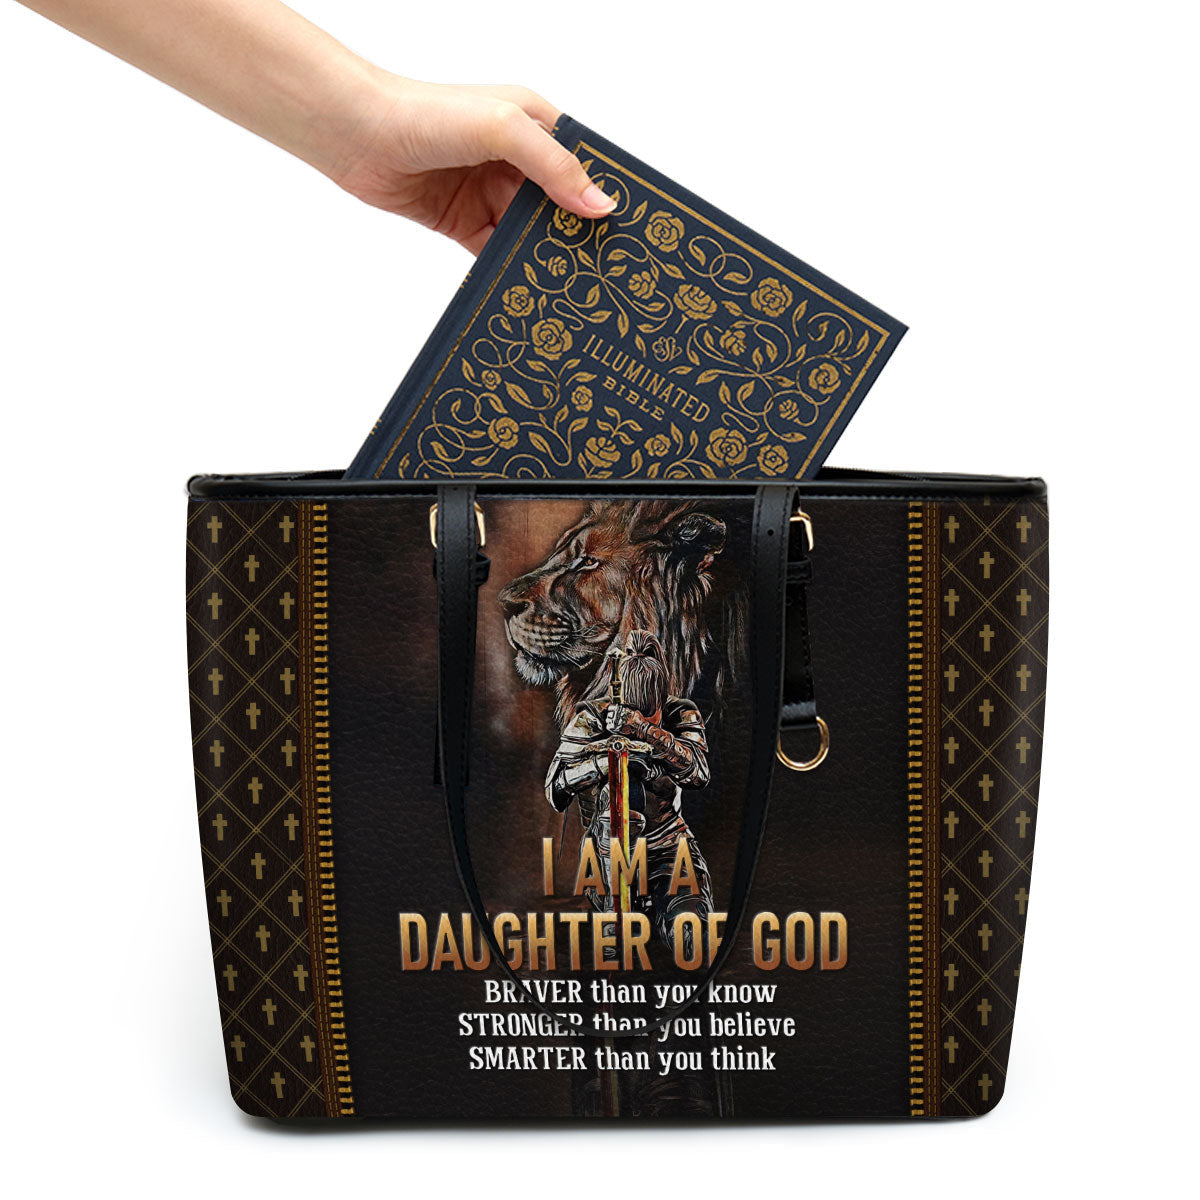 I Am A Daughter Of God Large Leather Tote Bag - Christ Gifts For Religious Women - Best Mother's Day Gifts